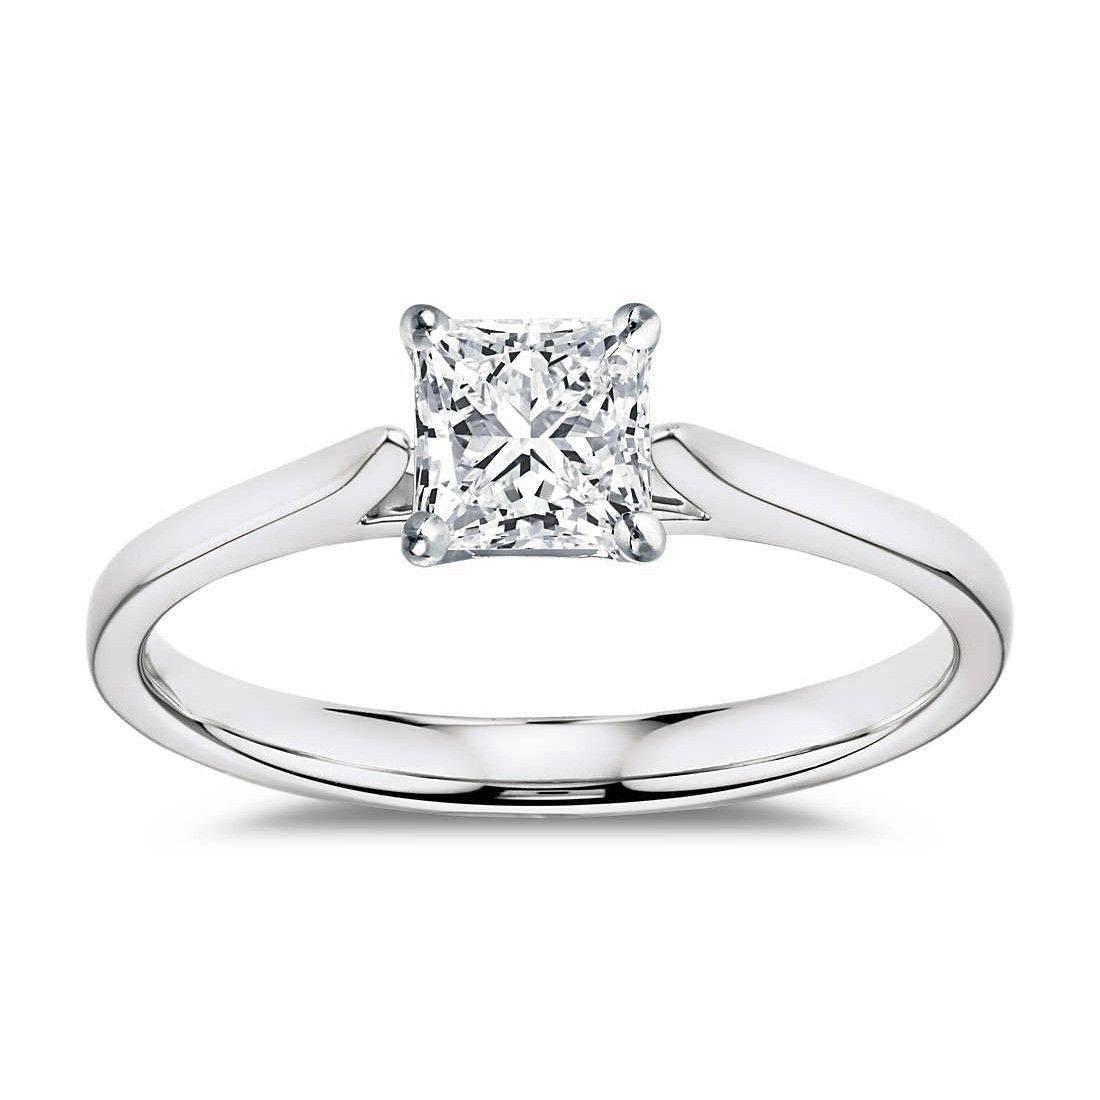 14k White Gold Certified Princess Cut Diamond Solitaire Pertaining To Most Popular Princess Cut And Round Diamond Anniversary Bands In White Gold (View 15 of 25)